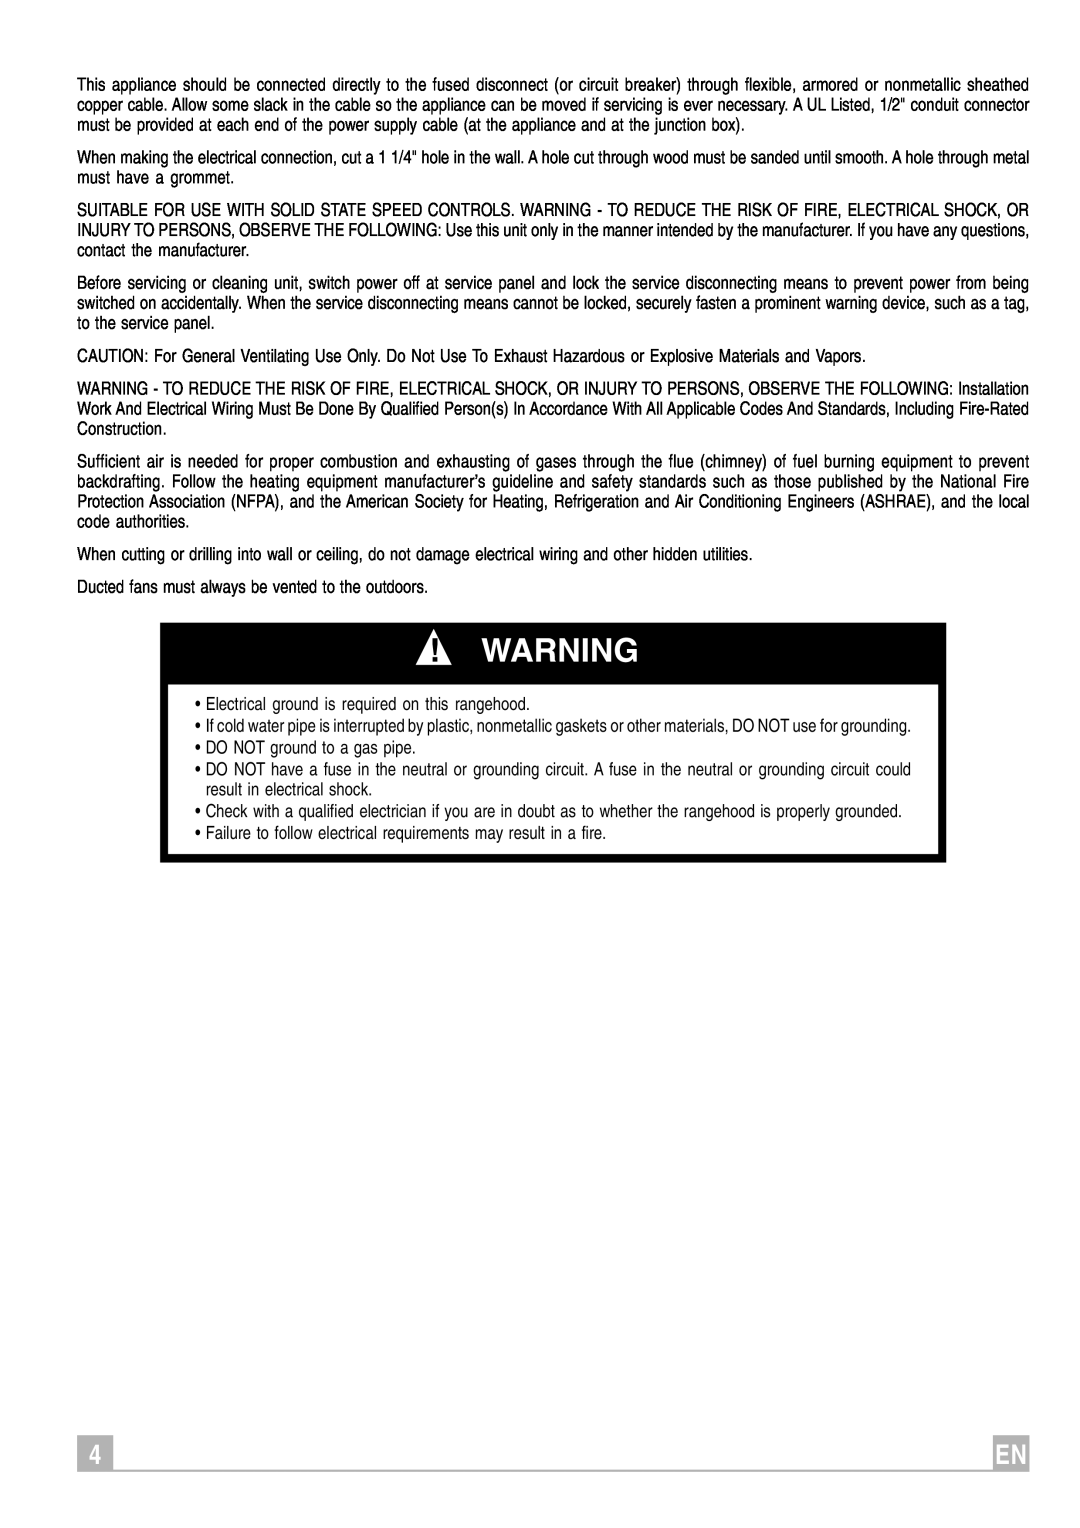 Faber Remote Blower instruction manual Ducted fans must always be vented to the outdoors 